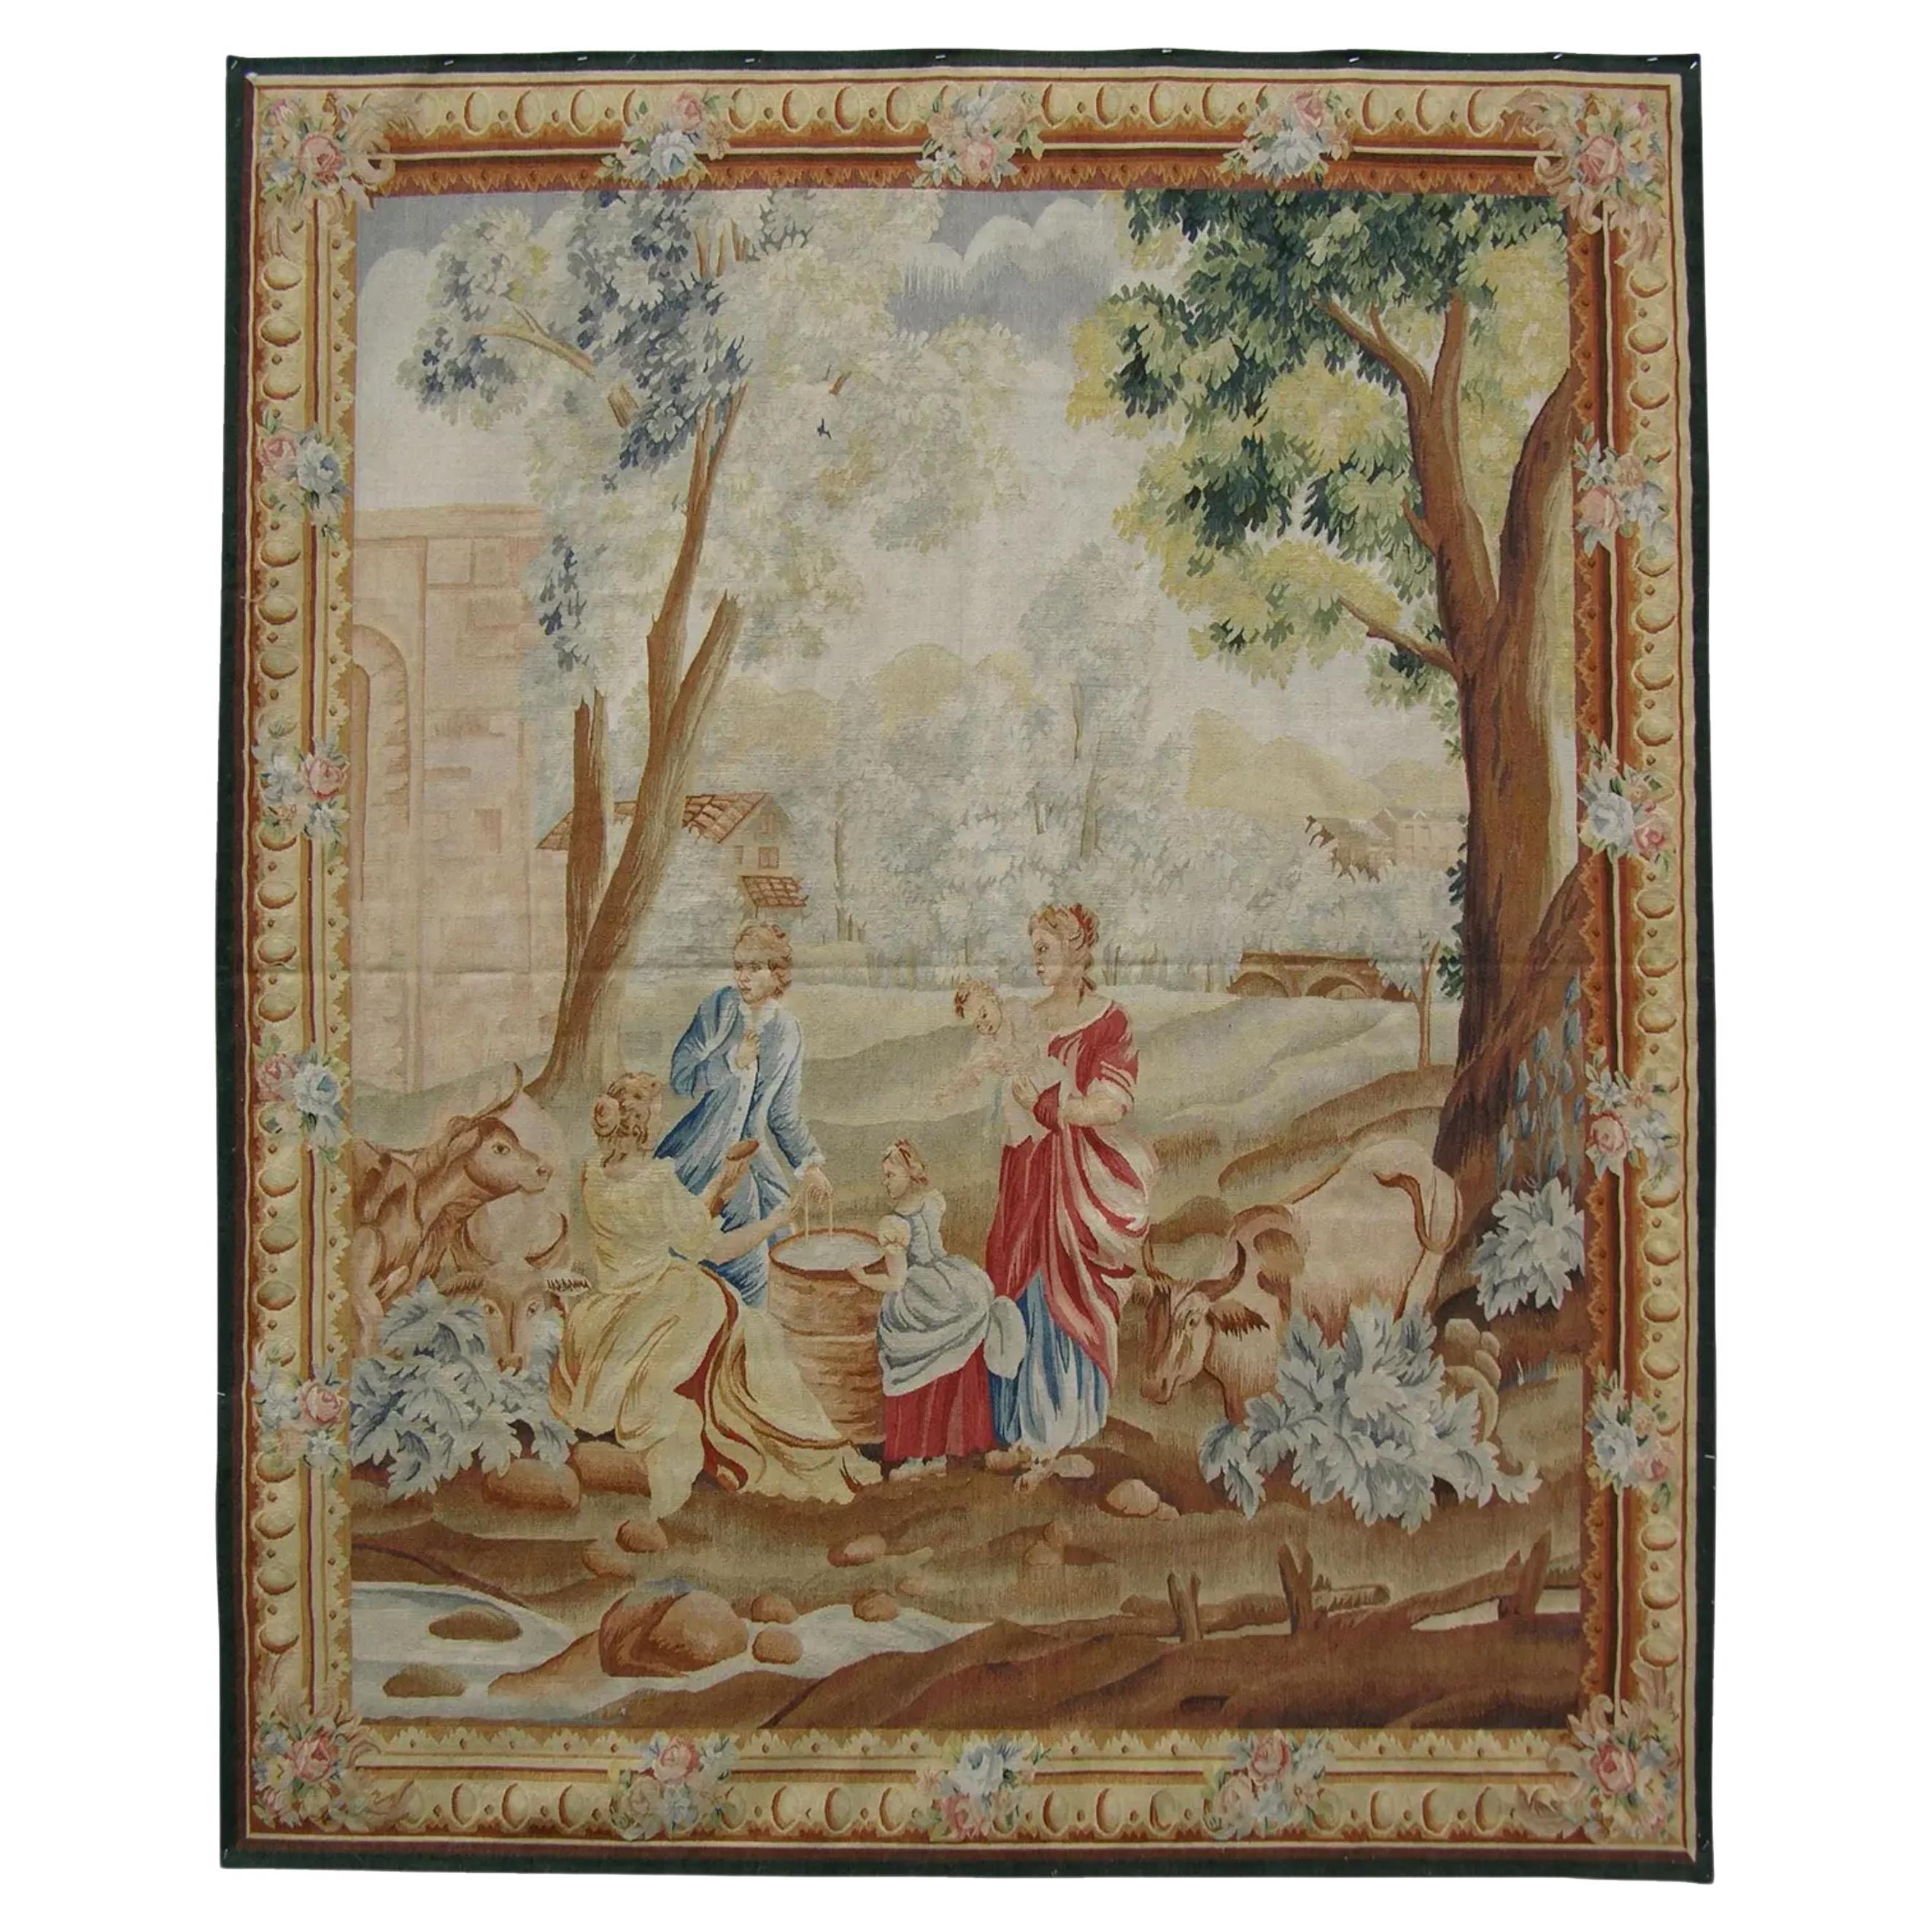 Vintage Tapestry Depicting Mother and Her Children 6.4X5.3